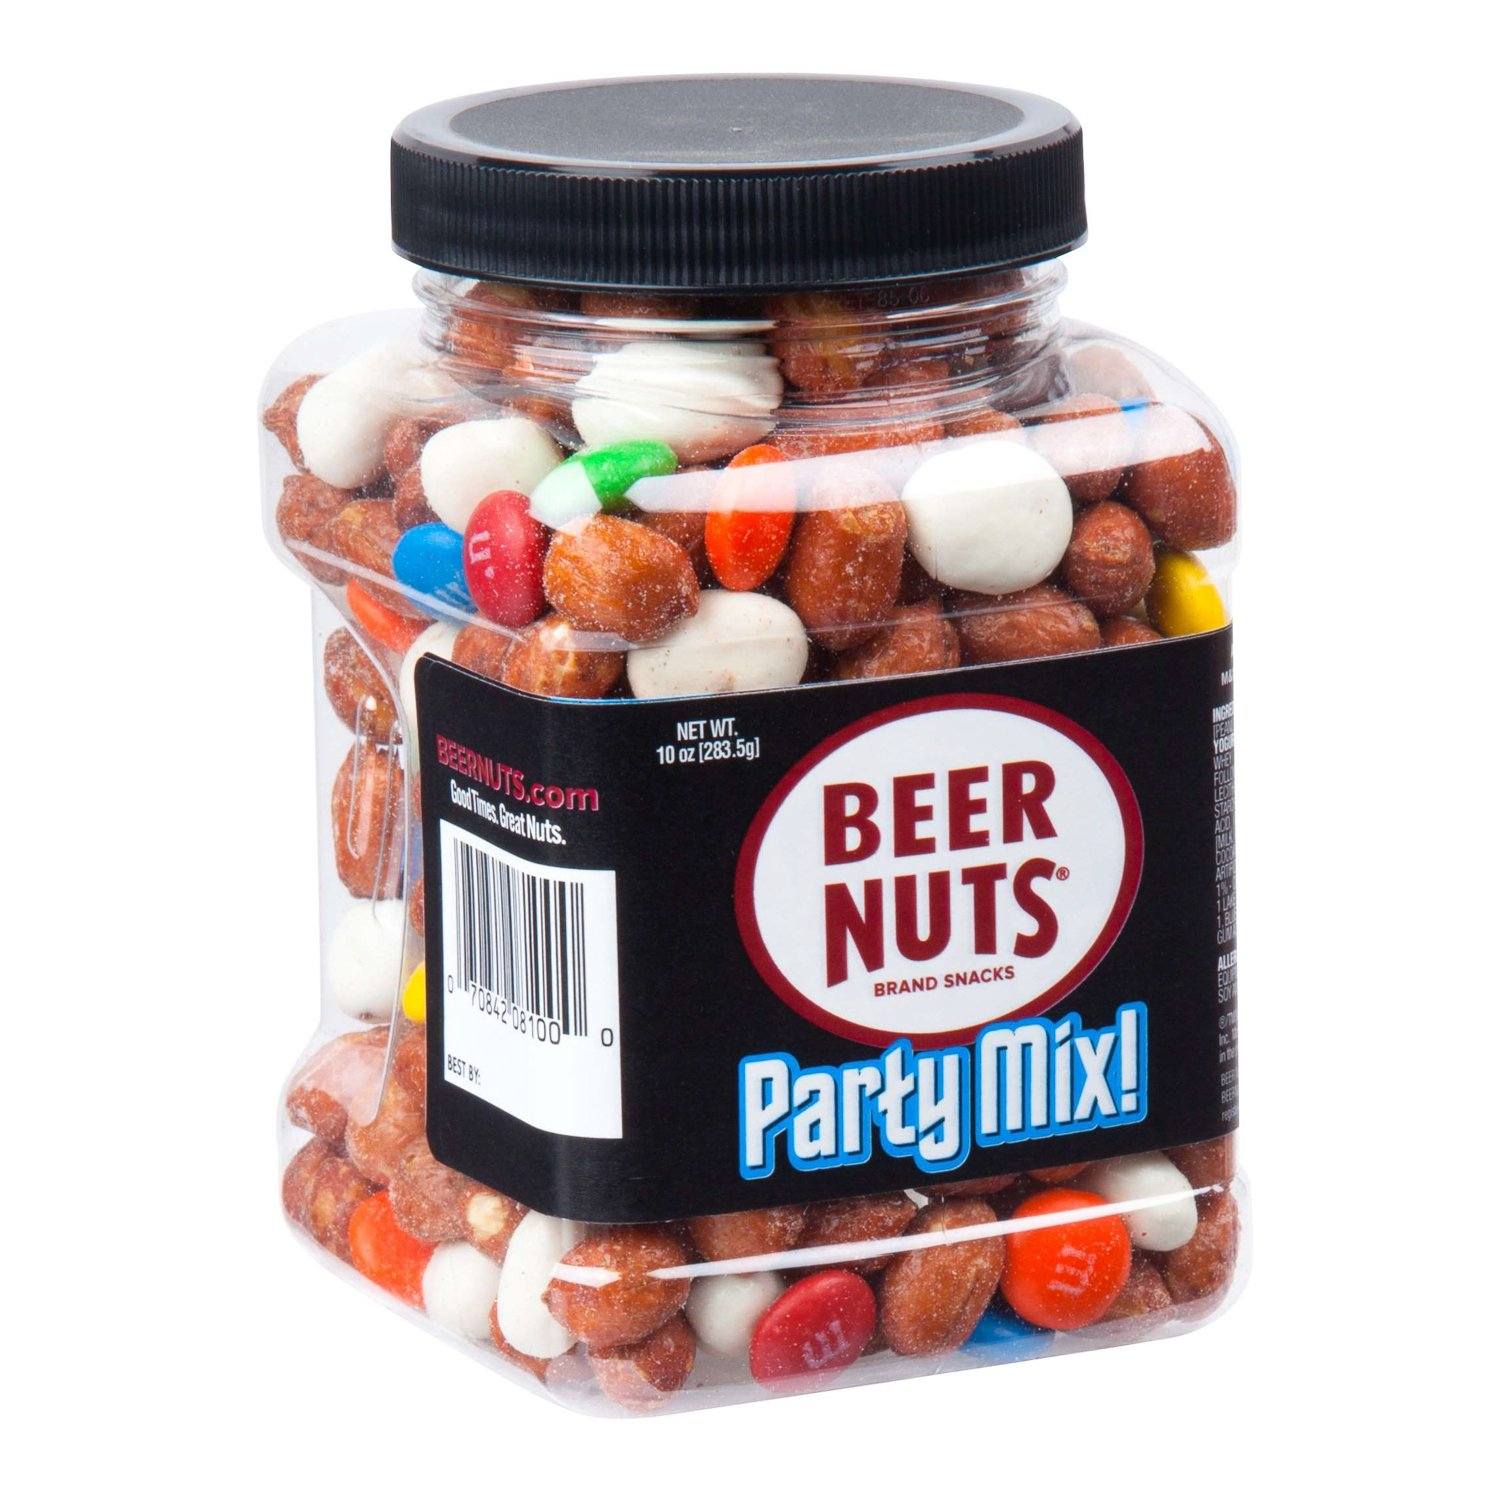 BEER NUTS Beer Nuts Party Mix 10 Ounce 